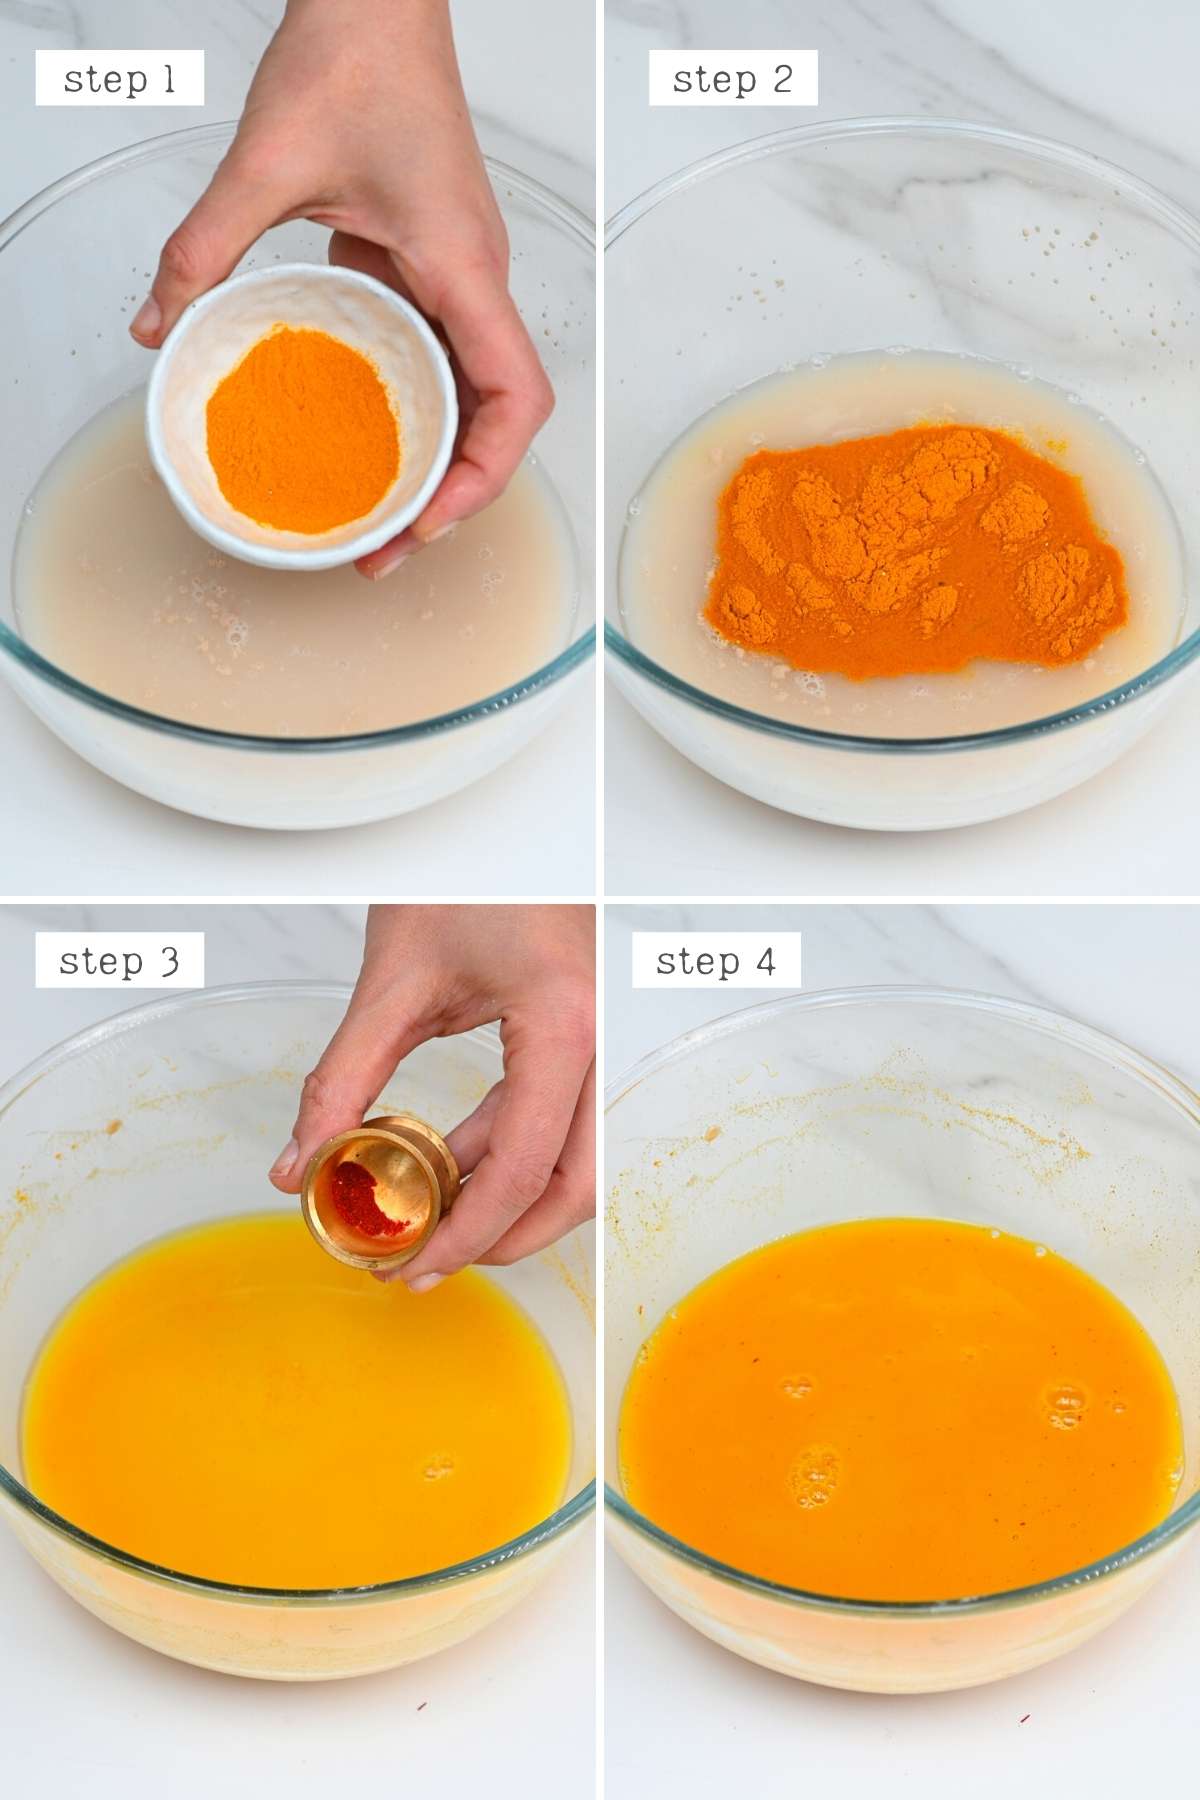 Steps for adding turmeric to yeast mix